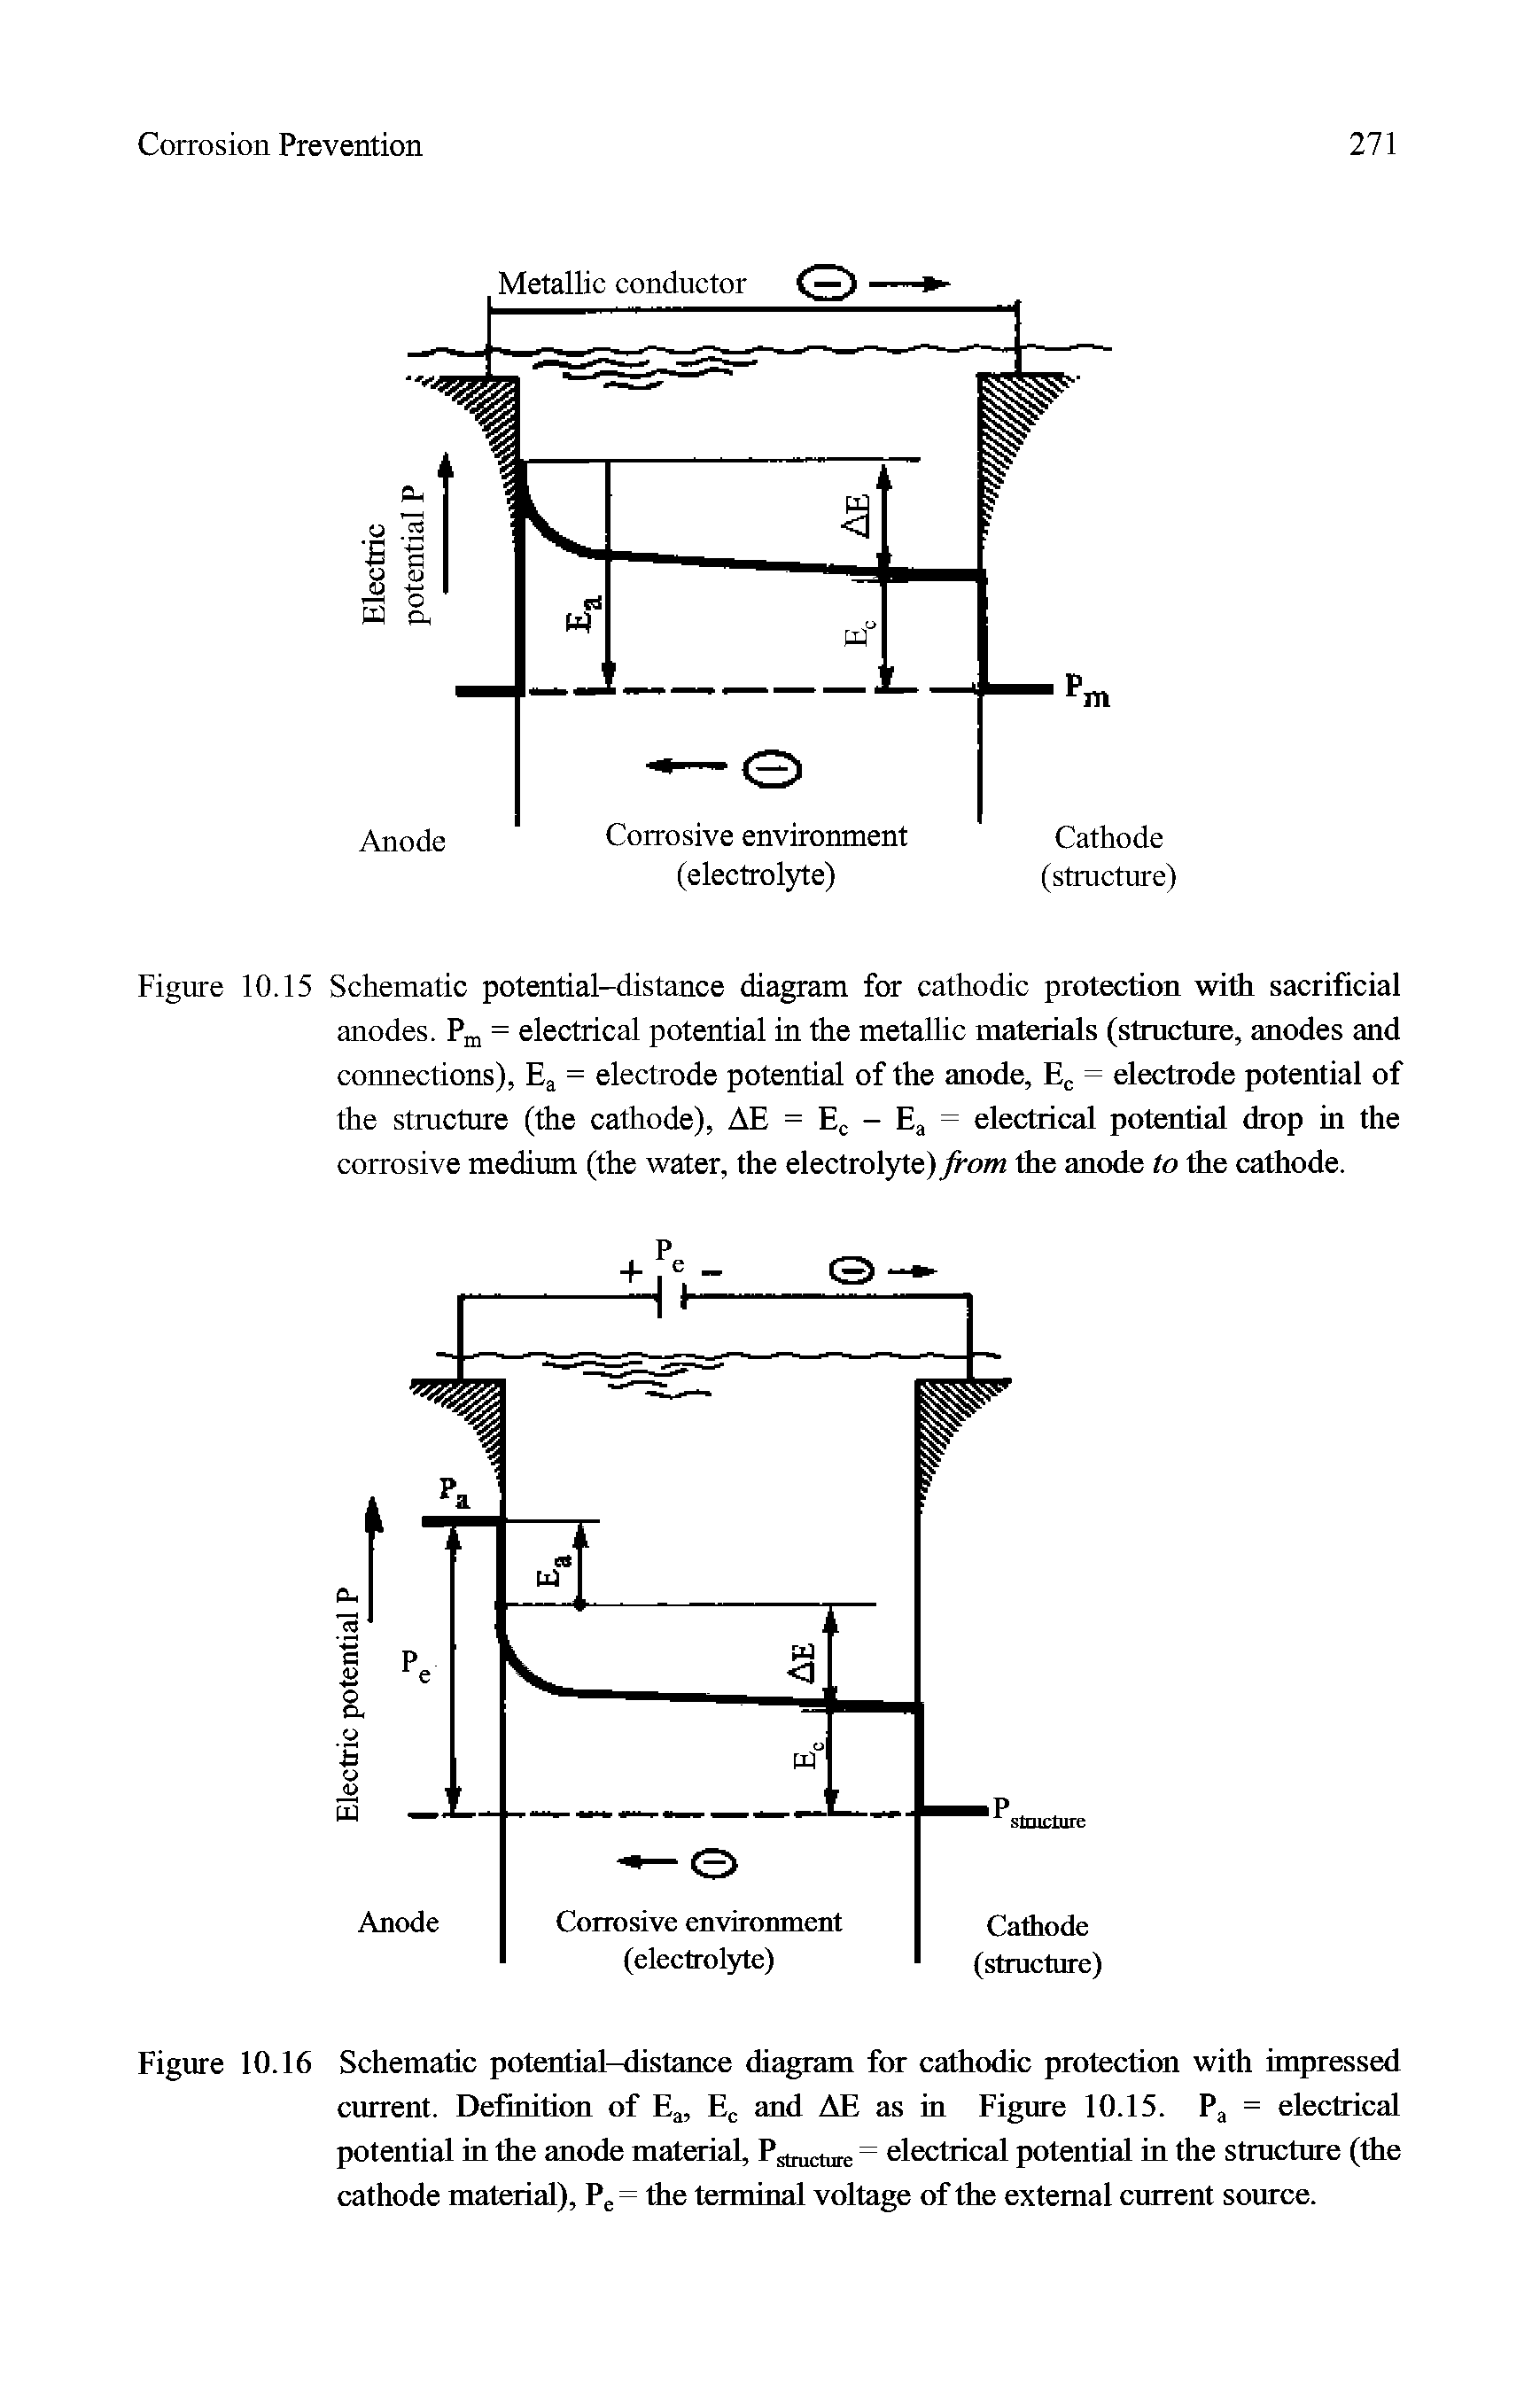 Figure 10.15 Schematic potential-distance diagram for cathodic protection with sacrificial anodes. = electrical potential in the metalhc materials (structure, anodes and connections), Ea = electrode potential of the anode, = electrode potential of the structure (the cathode), AE = E - E, = electrical potential drop in the corrosive medium (the water, the electrolyte) from the anode to the cathode.